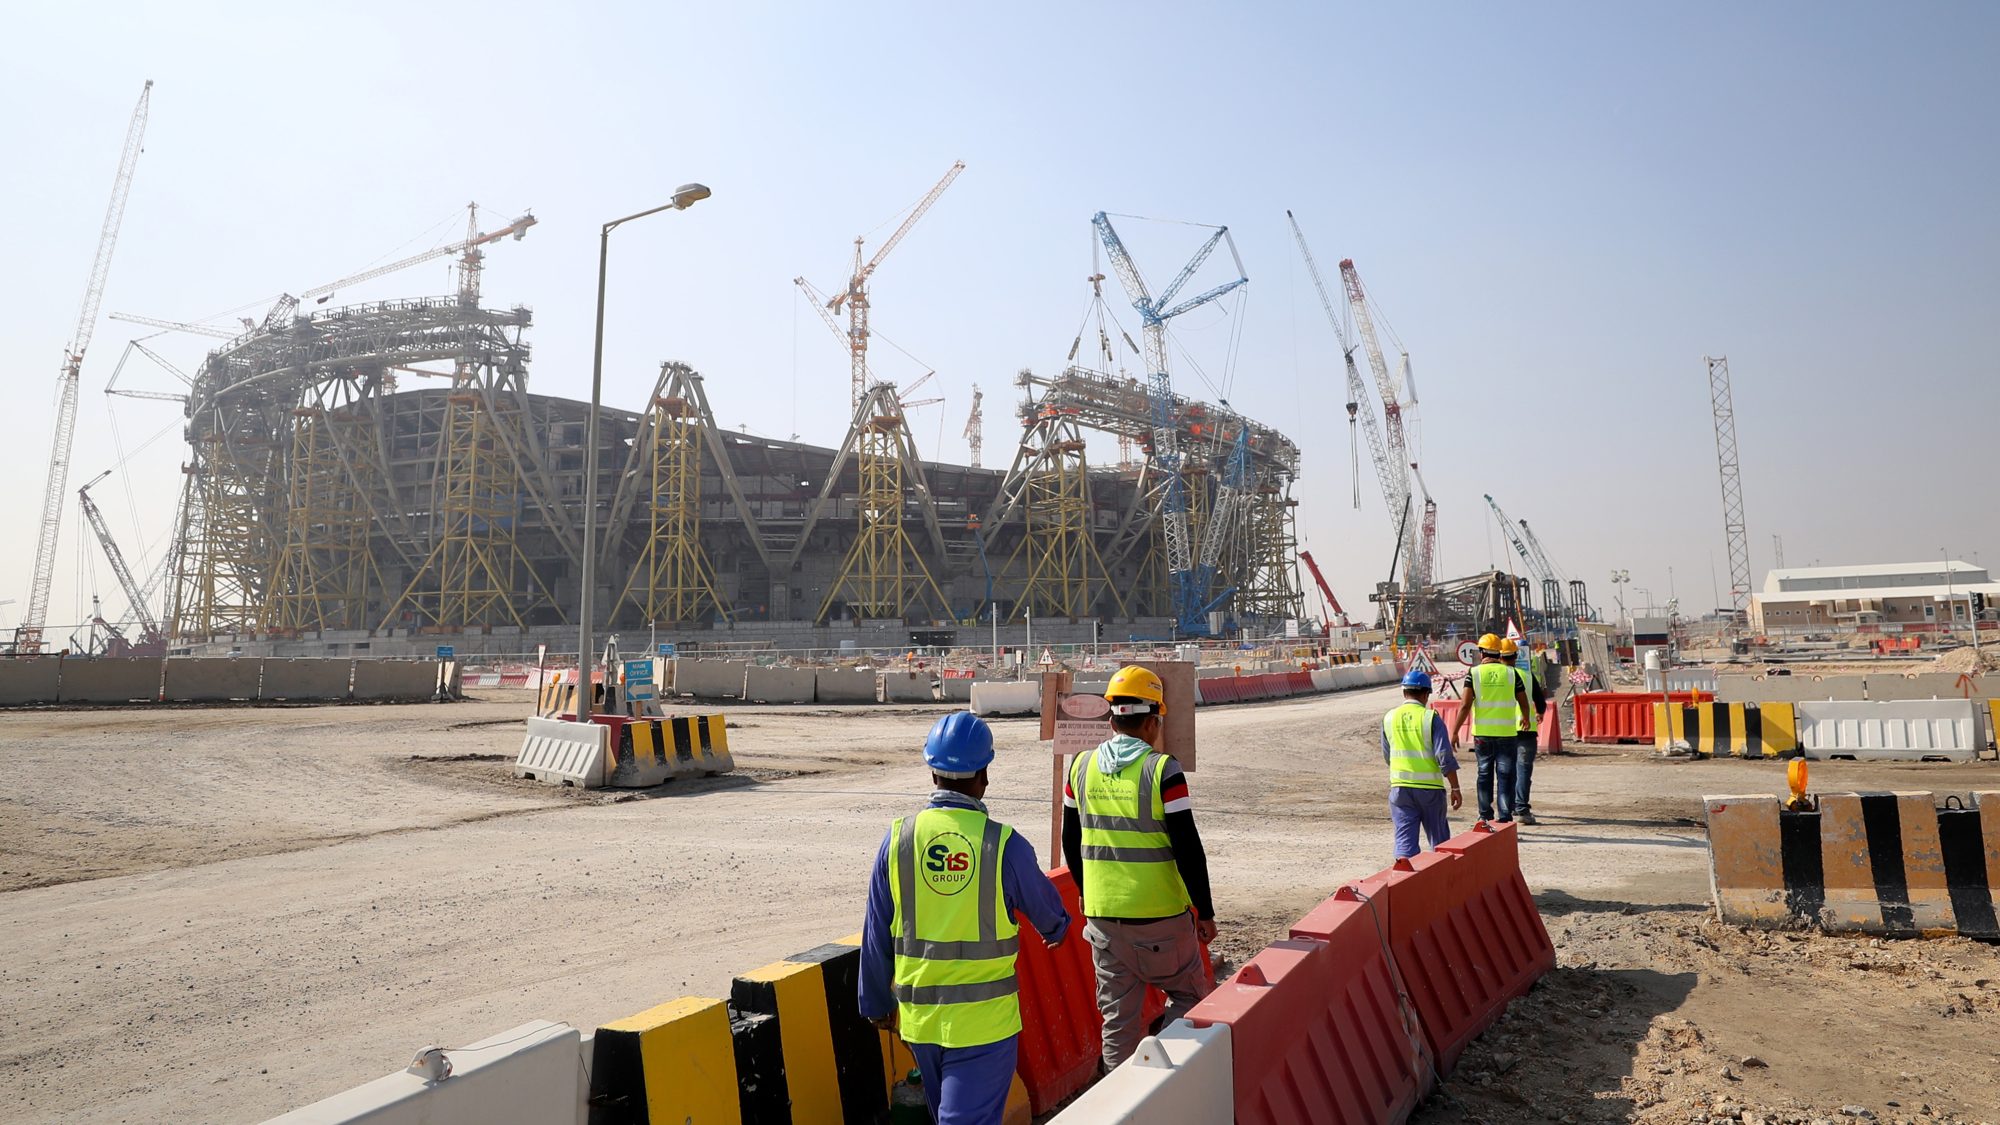 A general view of work being done on the Lusail stadium on December 20, 2019 in Doha, Qatar.